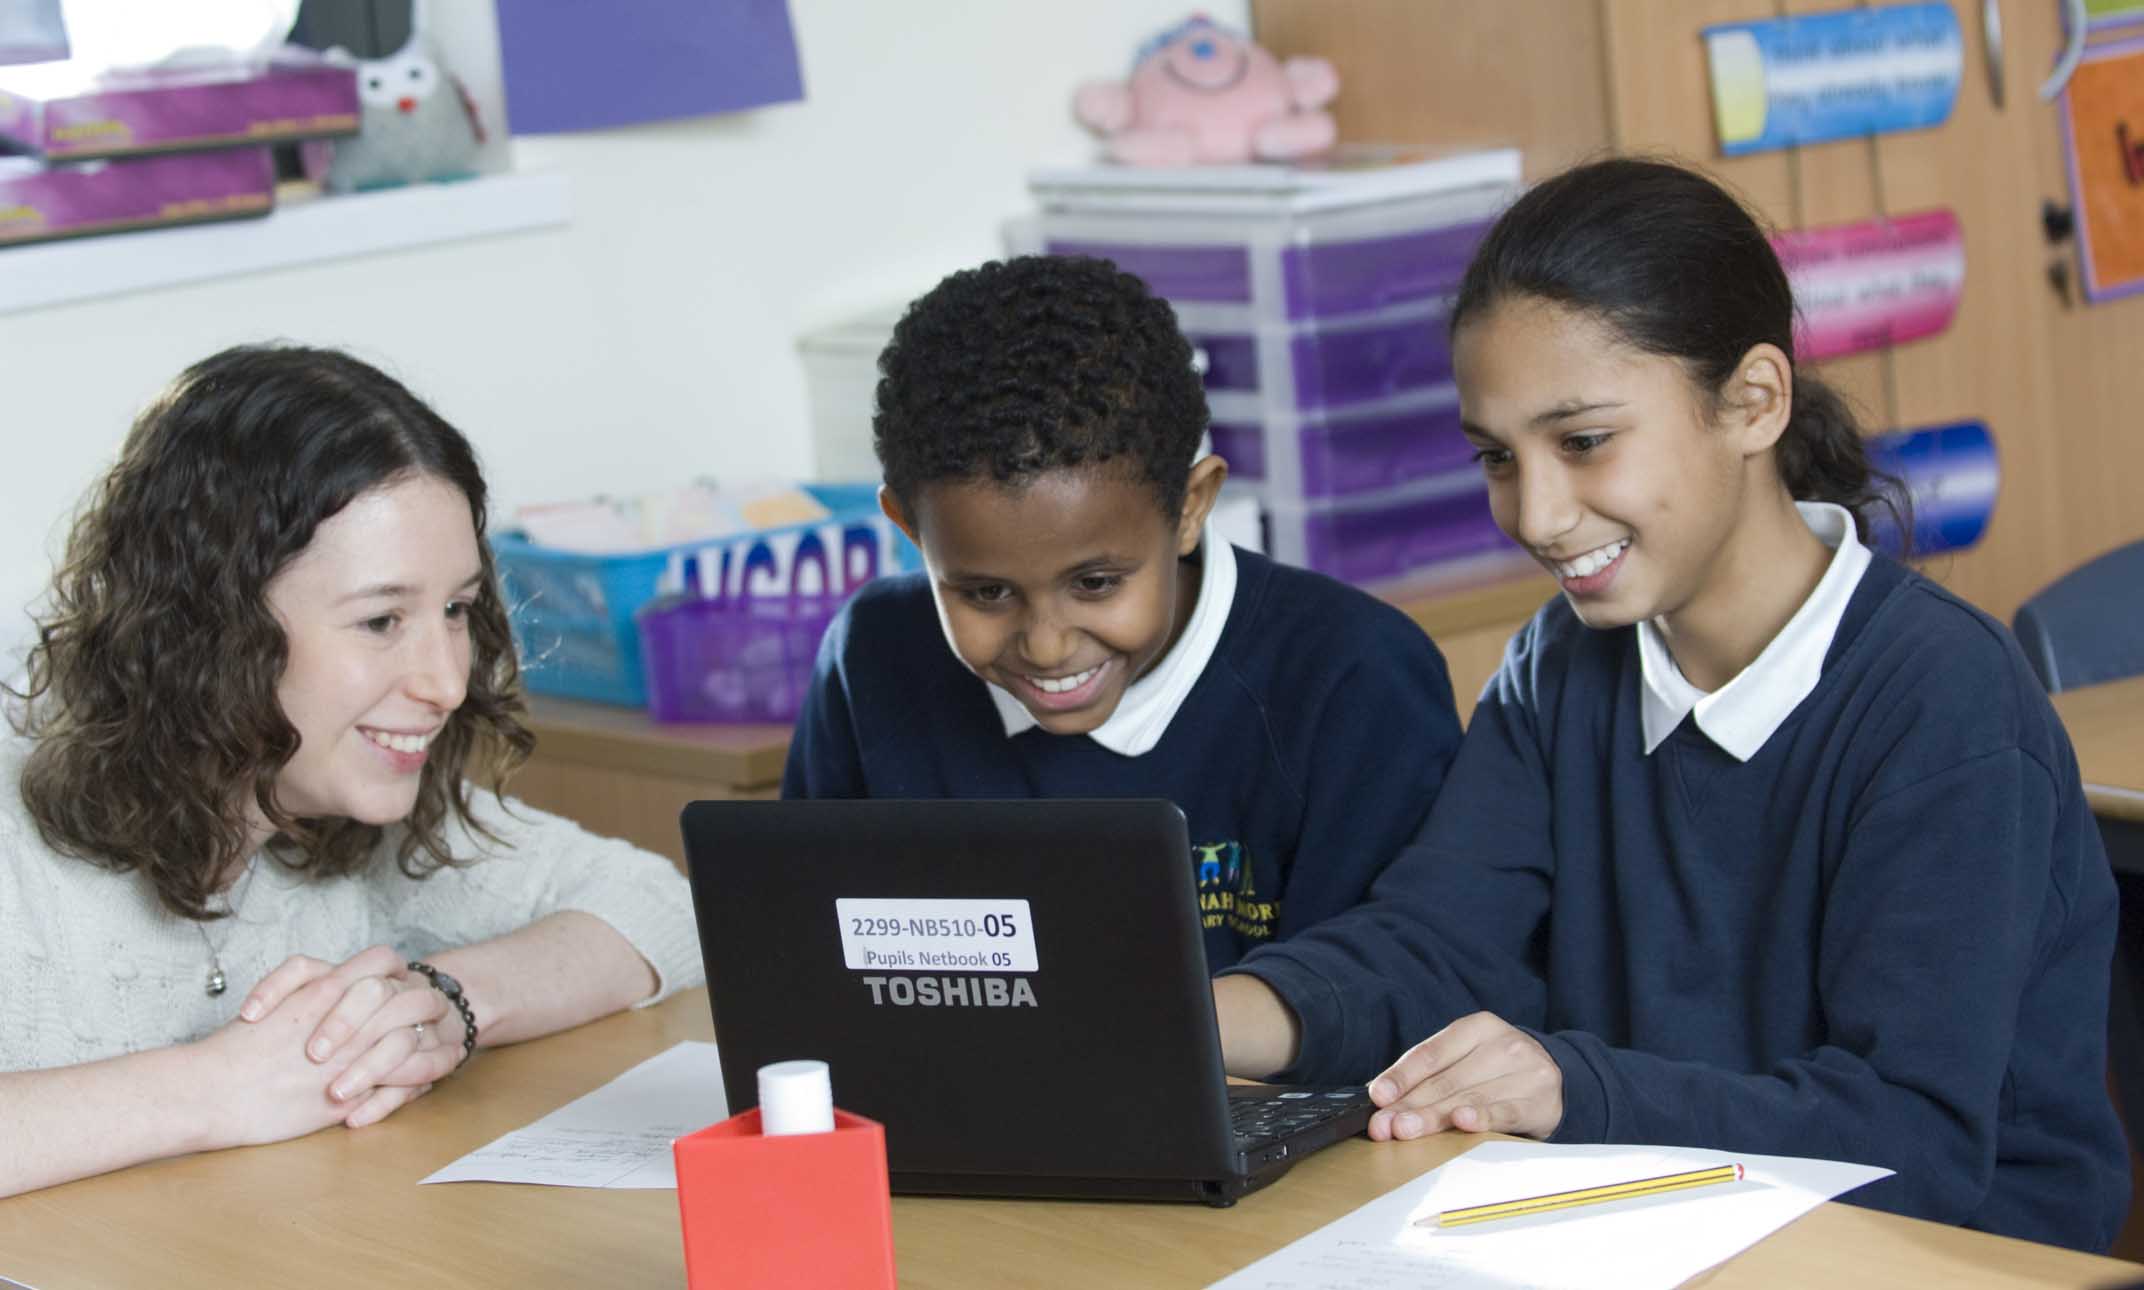 Children learning with a laptop